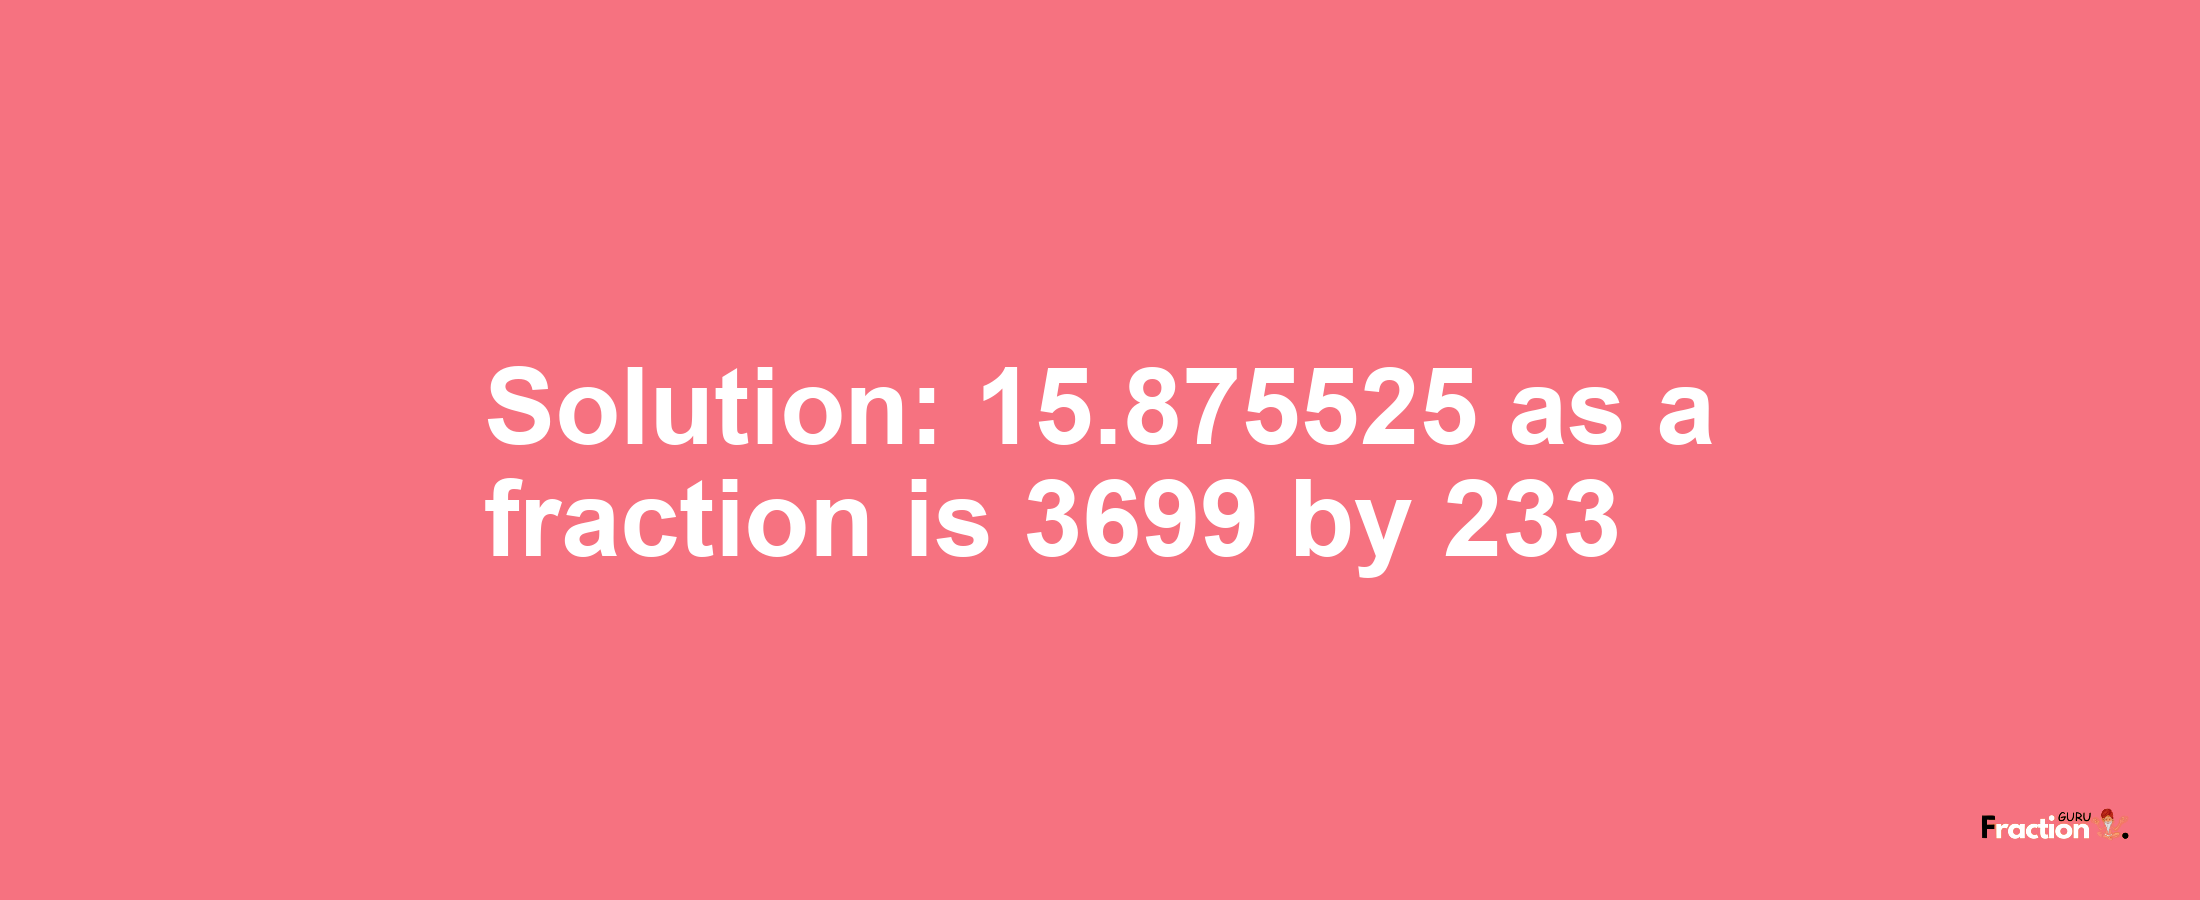 Solution:15.875525 as a fraction is 3699/233